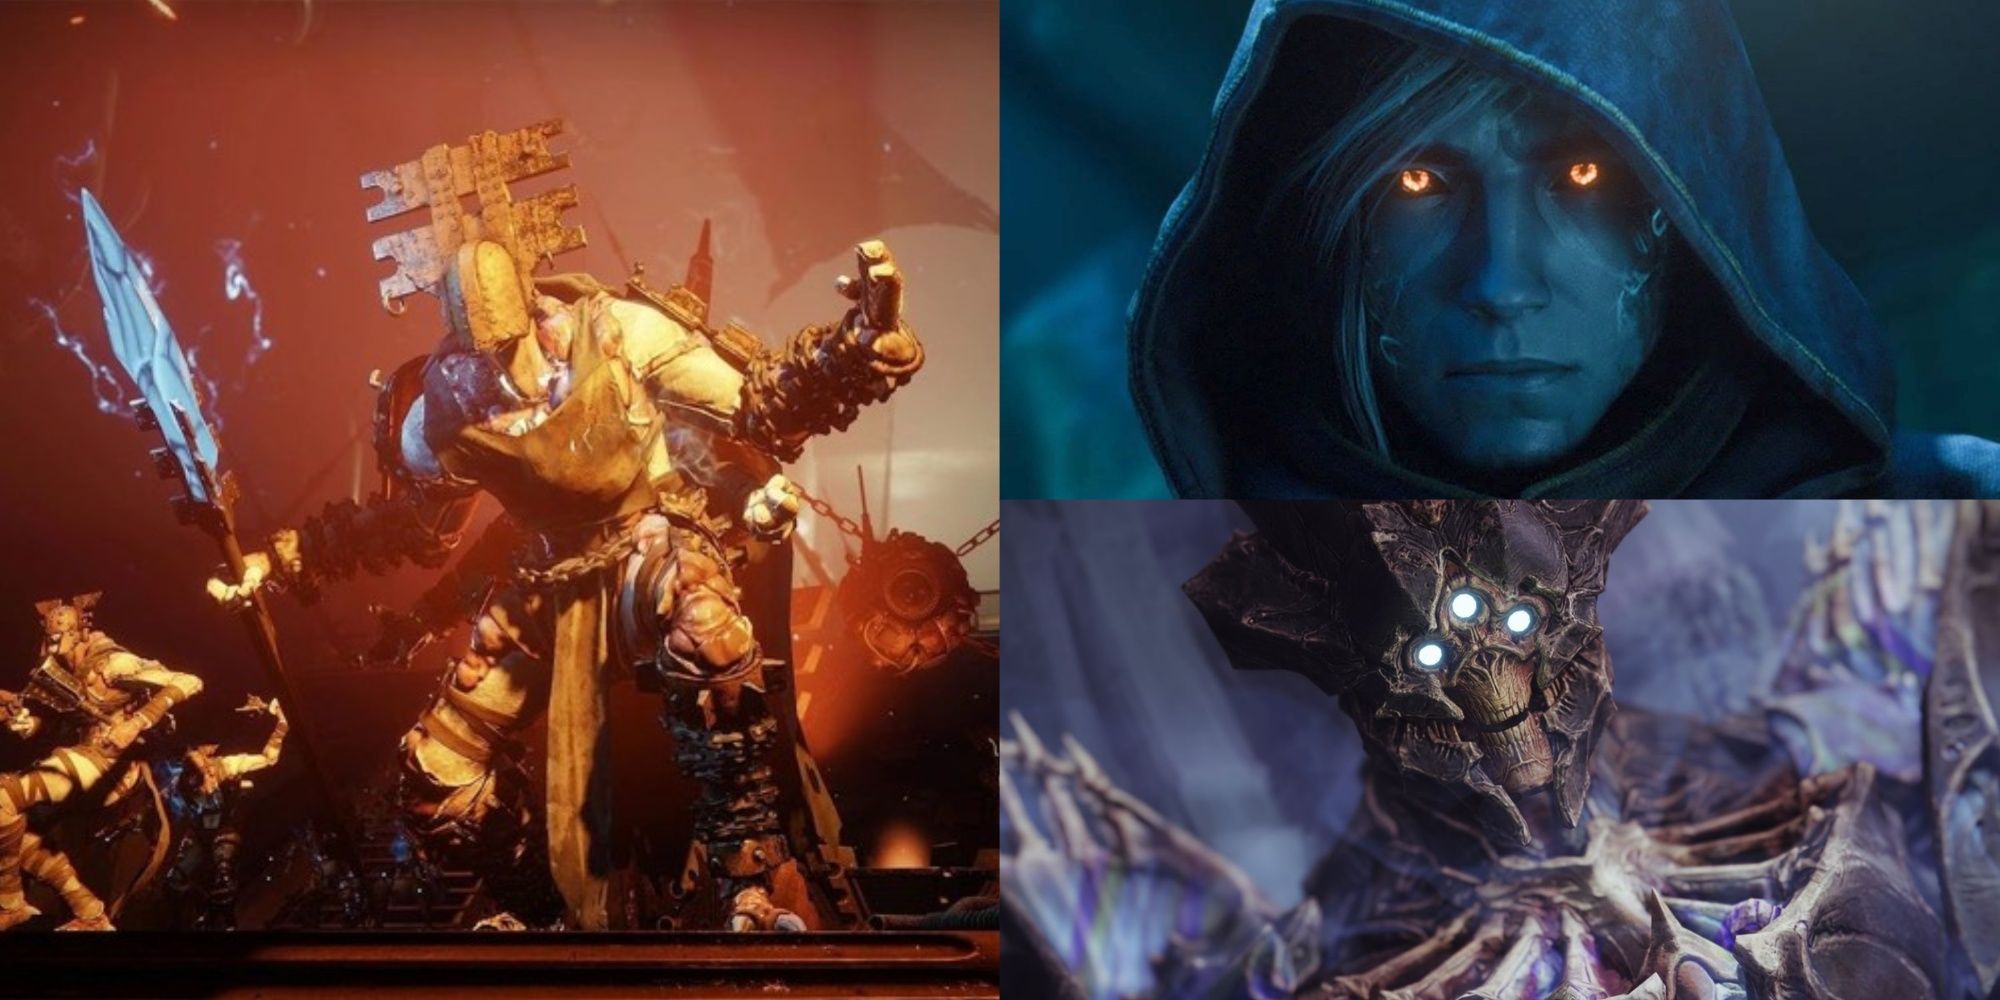 Collage of the Fanatic, Crow, and Savathun from Destiny 2